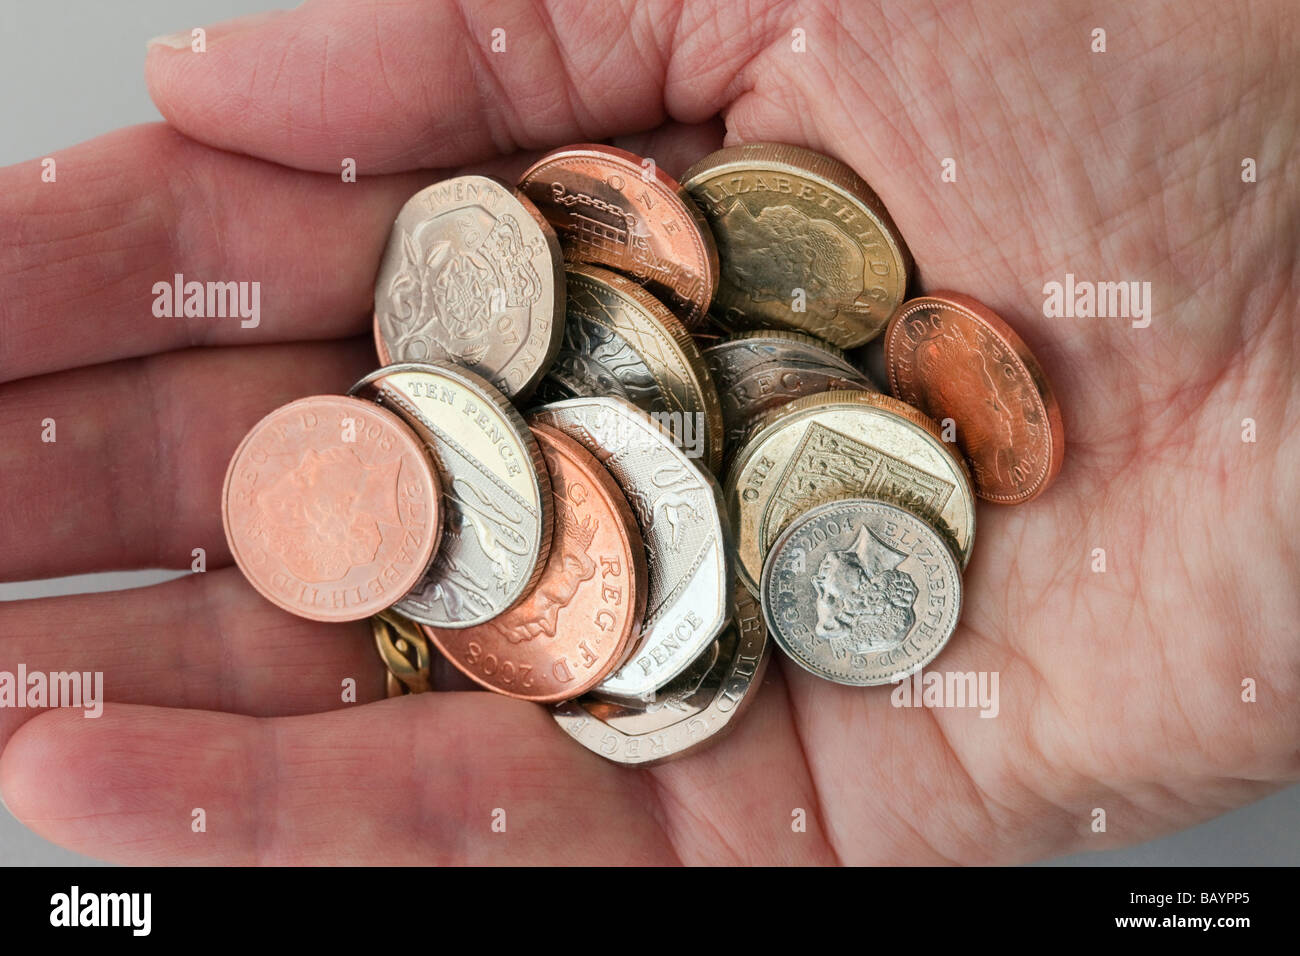 Pensioner holding a handful of Sterling money coins cash of low value in palm of an open hand to illustrate poverty in retirement austerity. UK Stock Photo